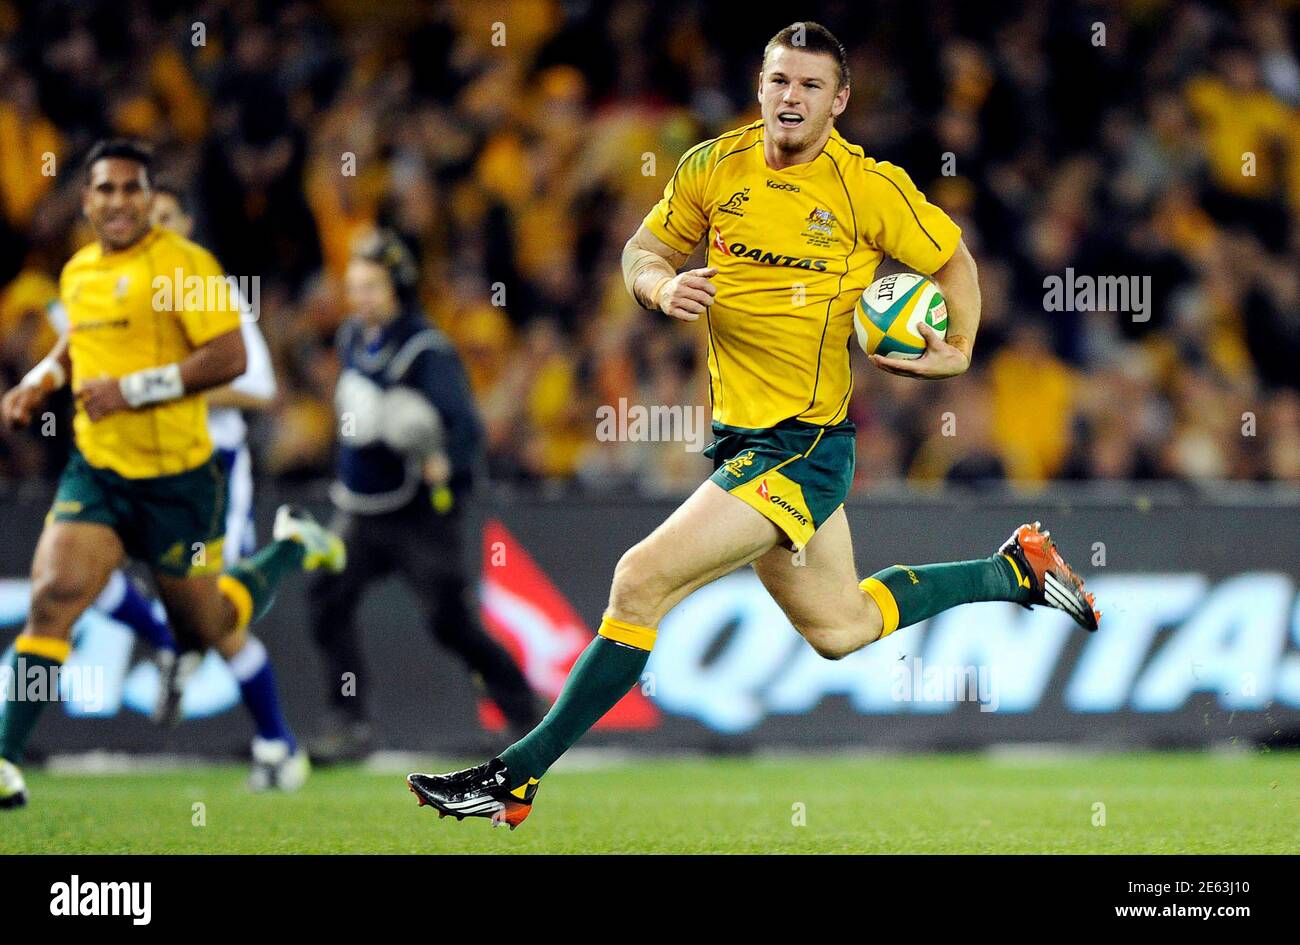 Australia's Rob Horne scores a try during their international rugby test match against Wales in Melbourne June 16, 2012. REUTERS/Mal Fairclough (AUSTRALIA - Tags: SPORT RUGBY) Stock Photo